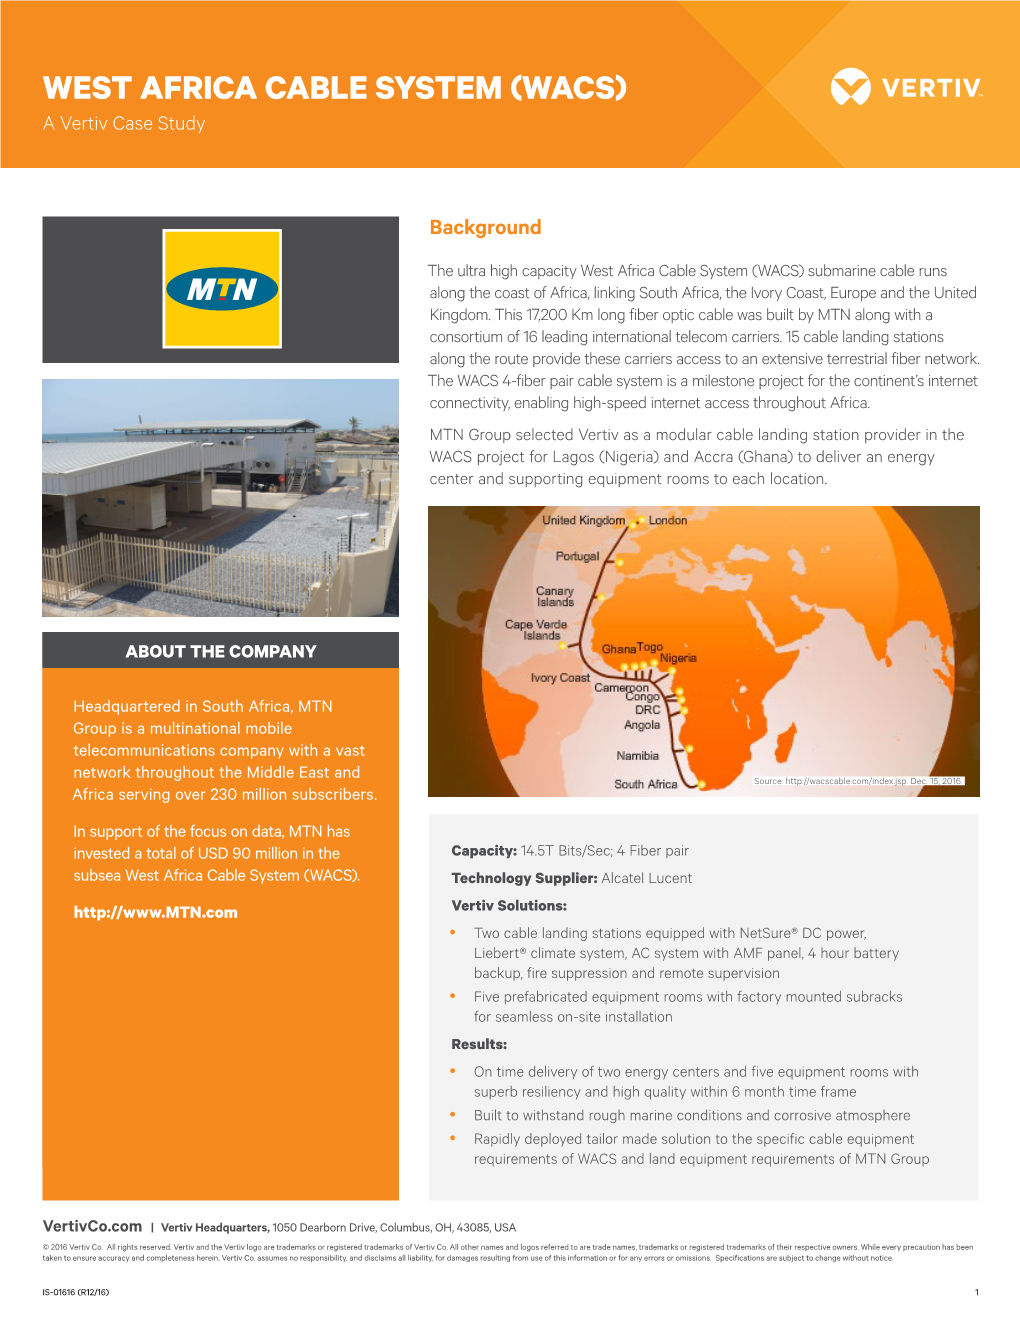 WEST AFRICA CABLE SYSTEM (WACS) a Vertiv Case Study